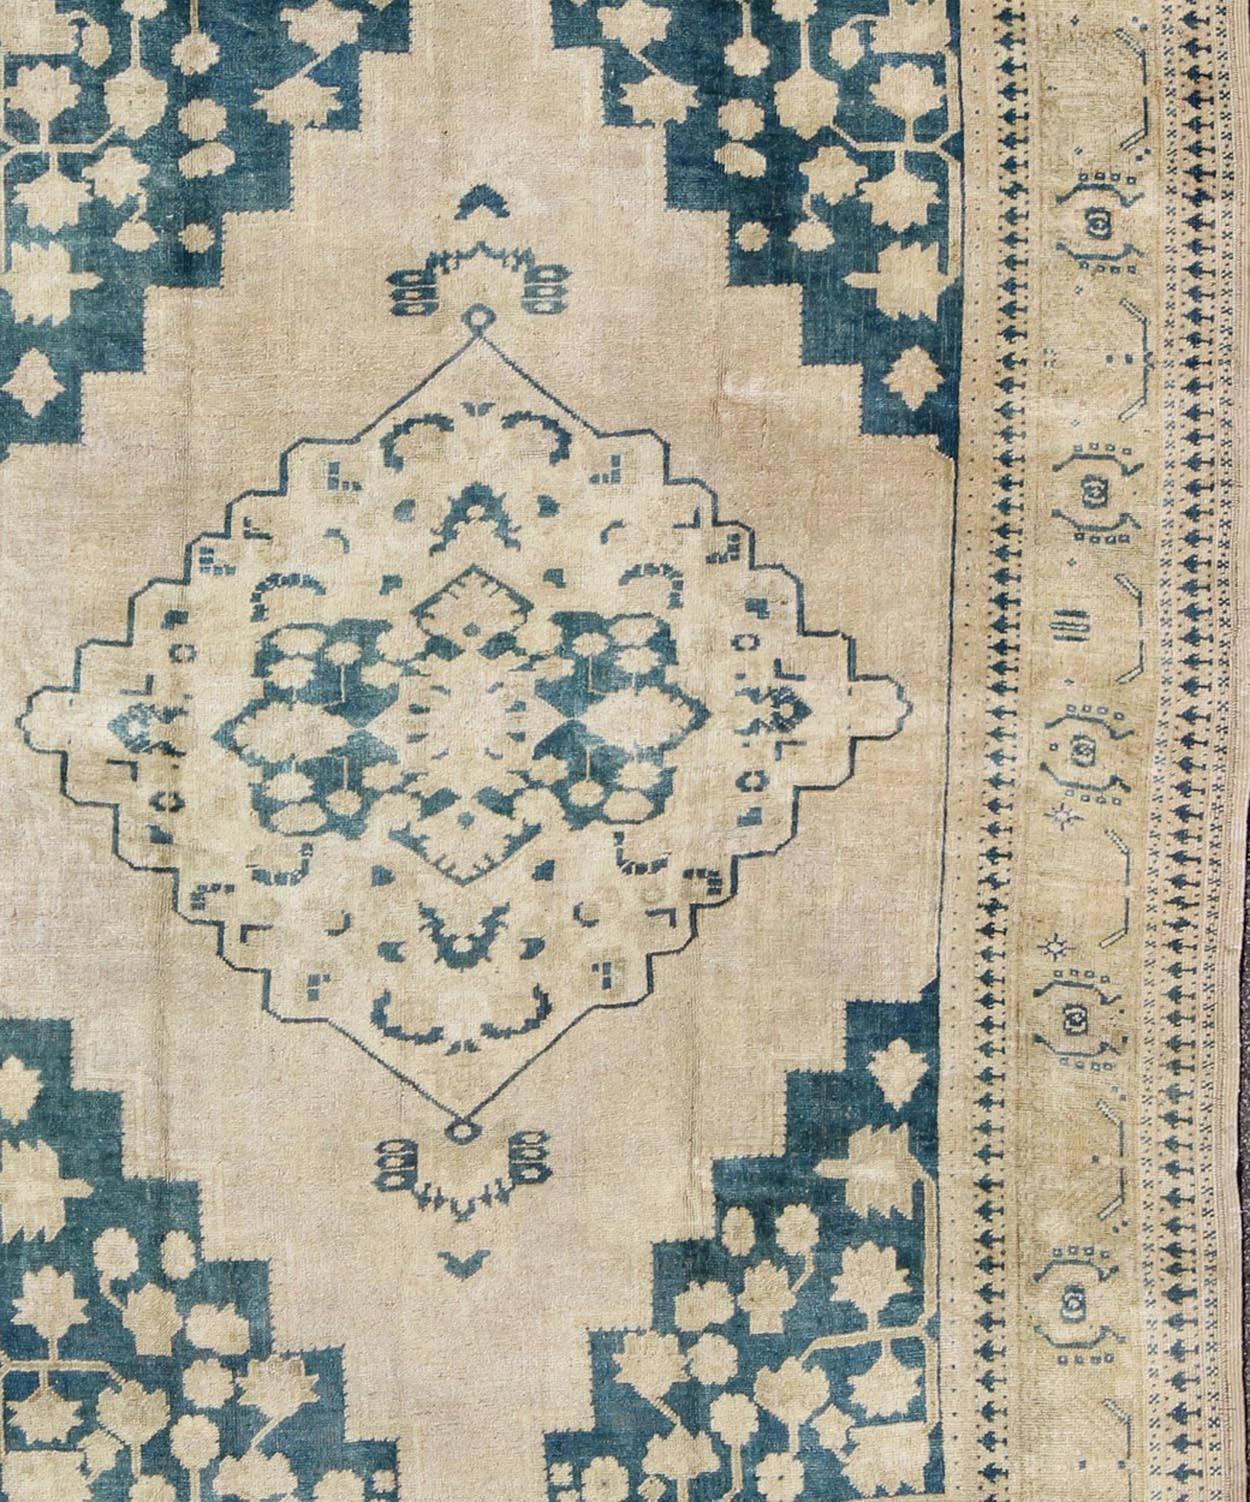 Vintage Turkish Oushak Rug in Blue and Cream colors In Excellent Condition For Sale In Atlanta, GA